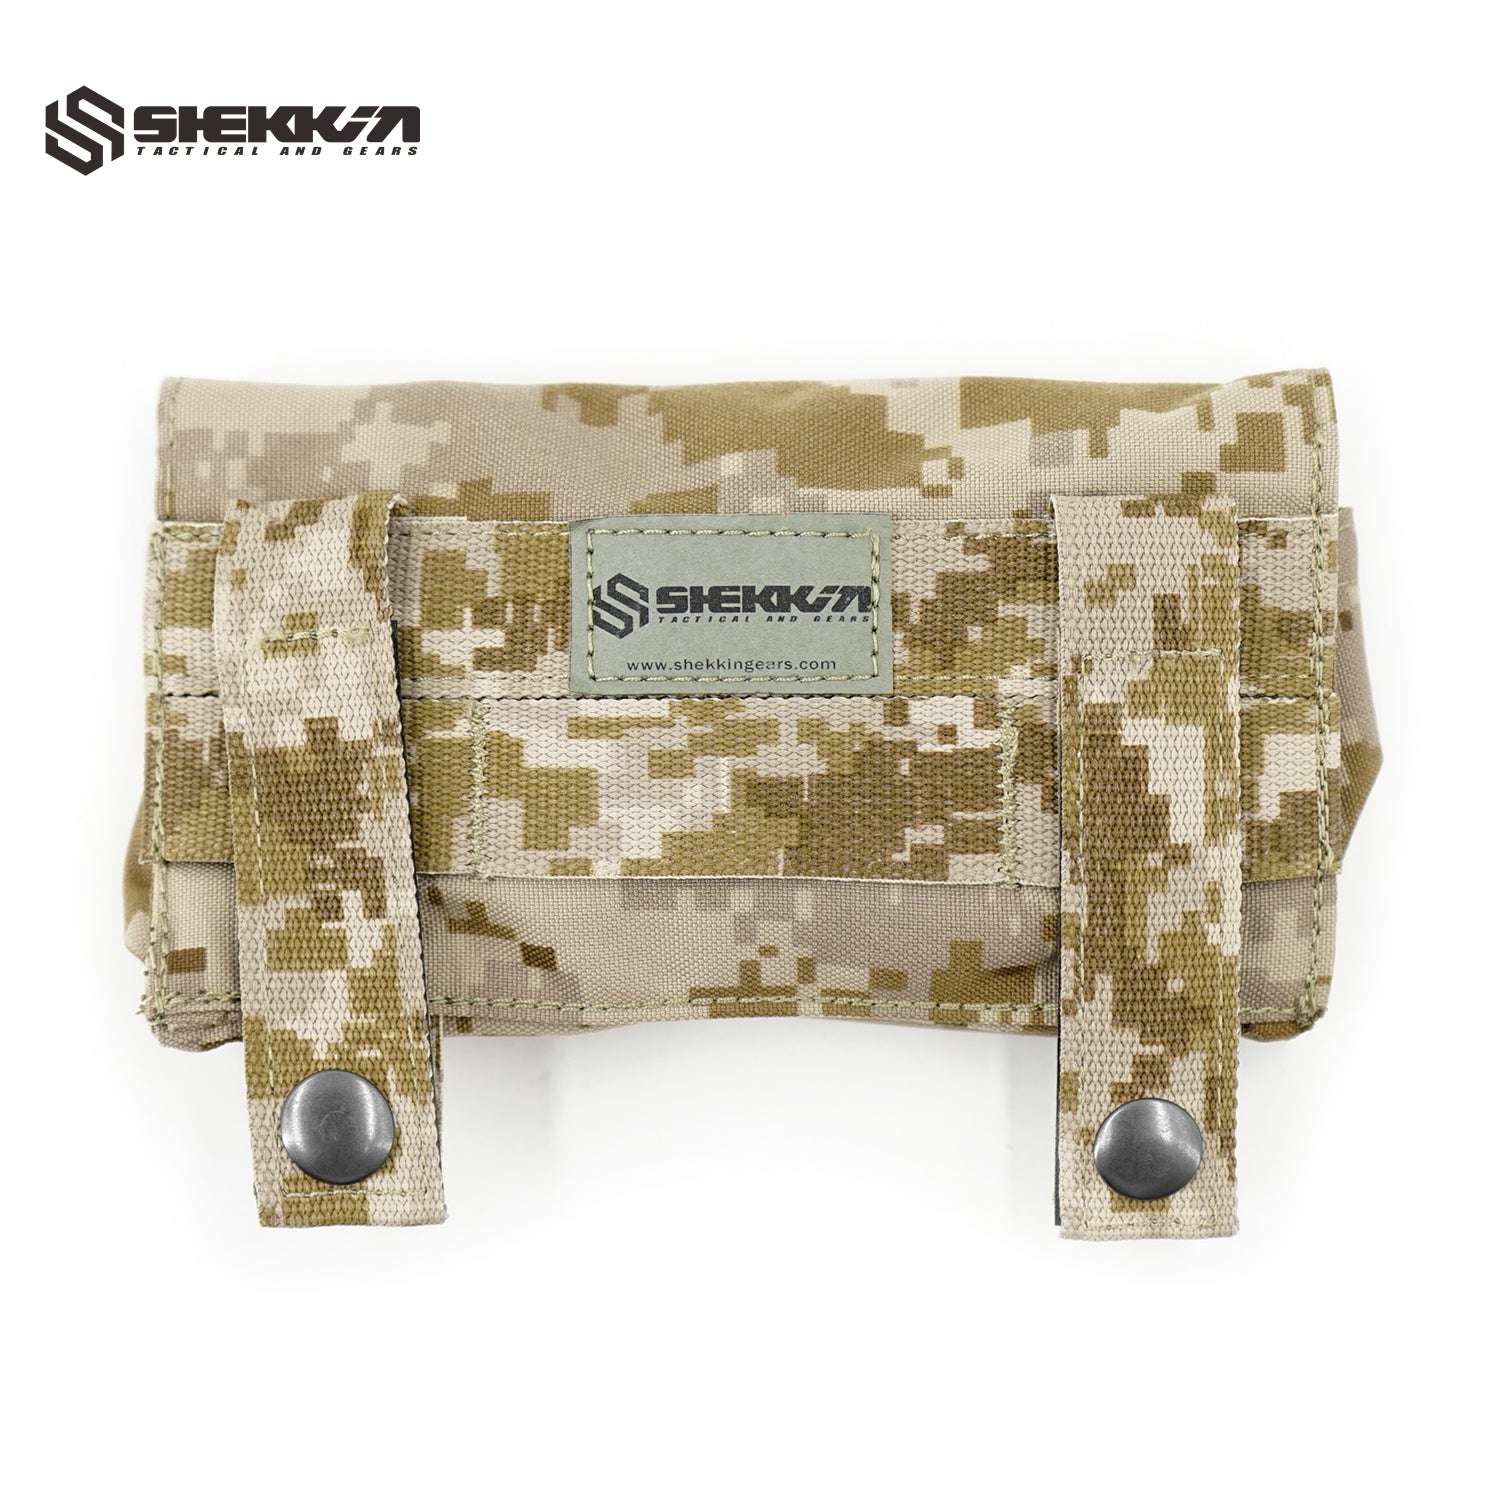 Egale Industry Style AOR1 Signal Pouch - Shekkin Gears